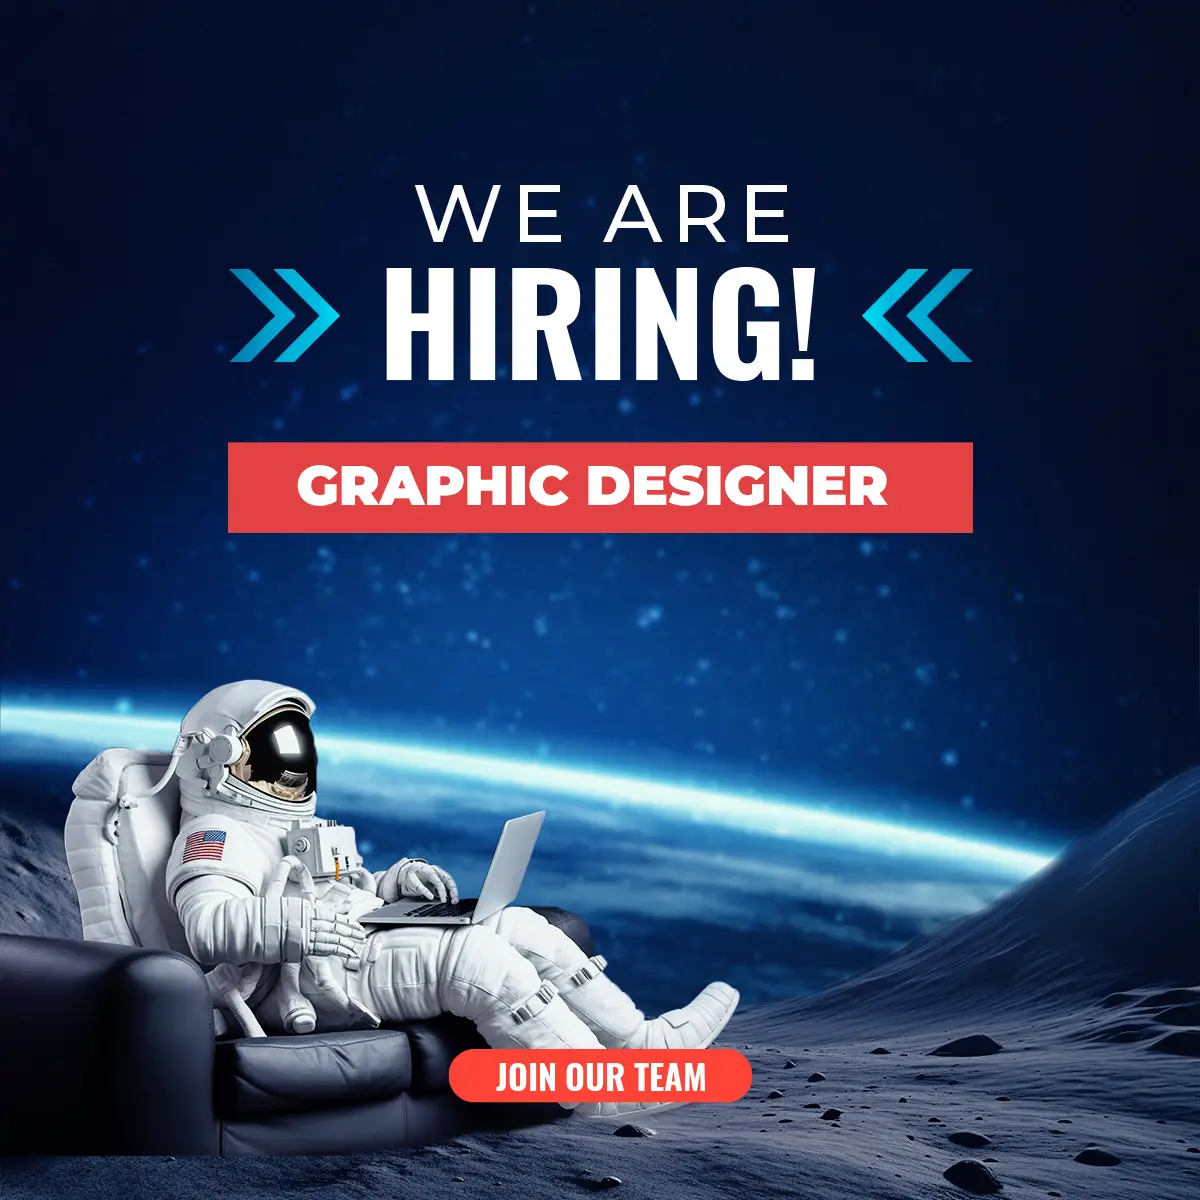 hiring a full-time creative and talented “Graphic Designer”.